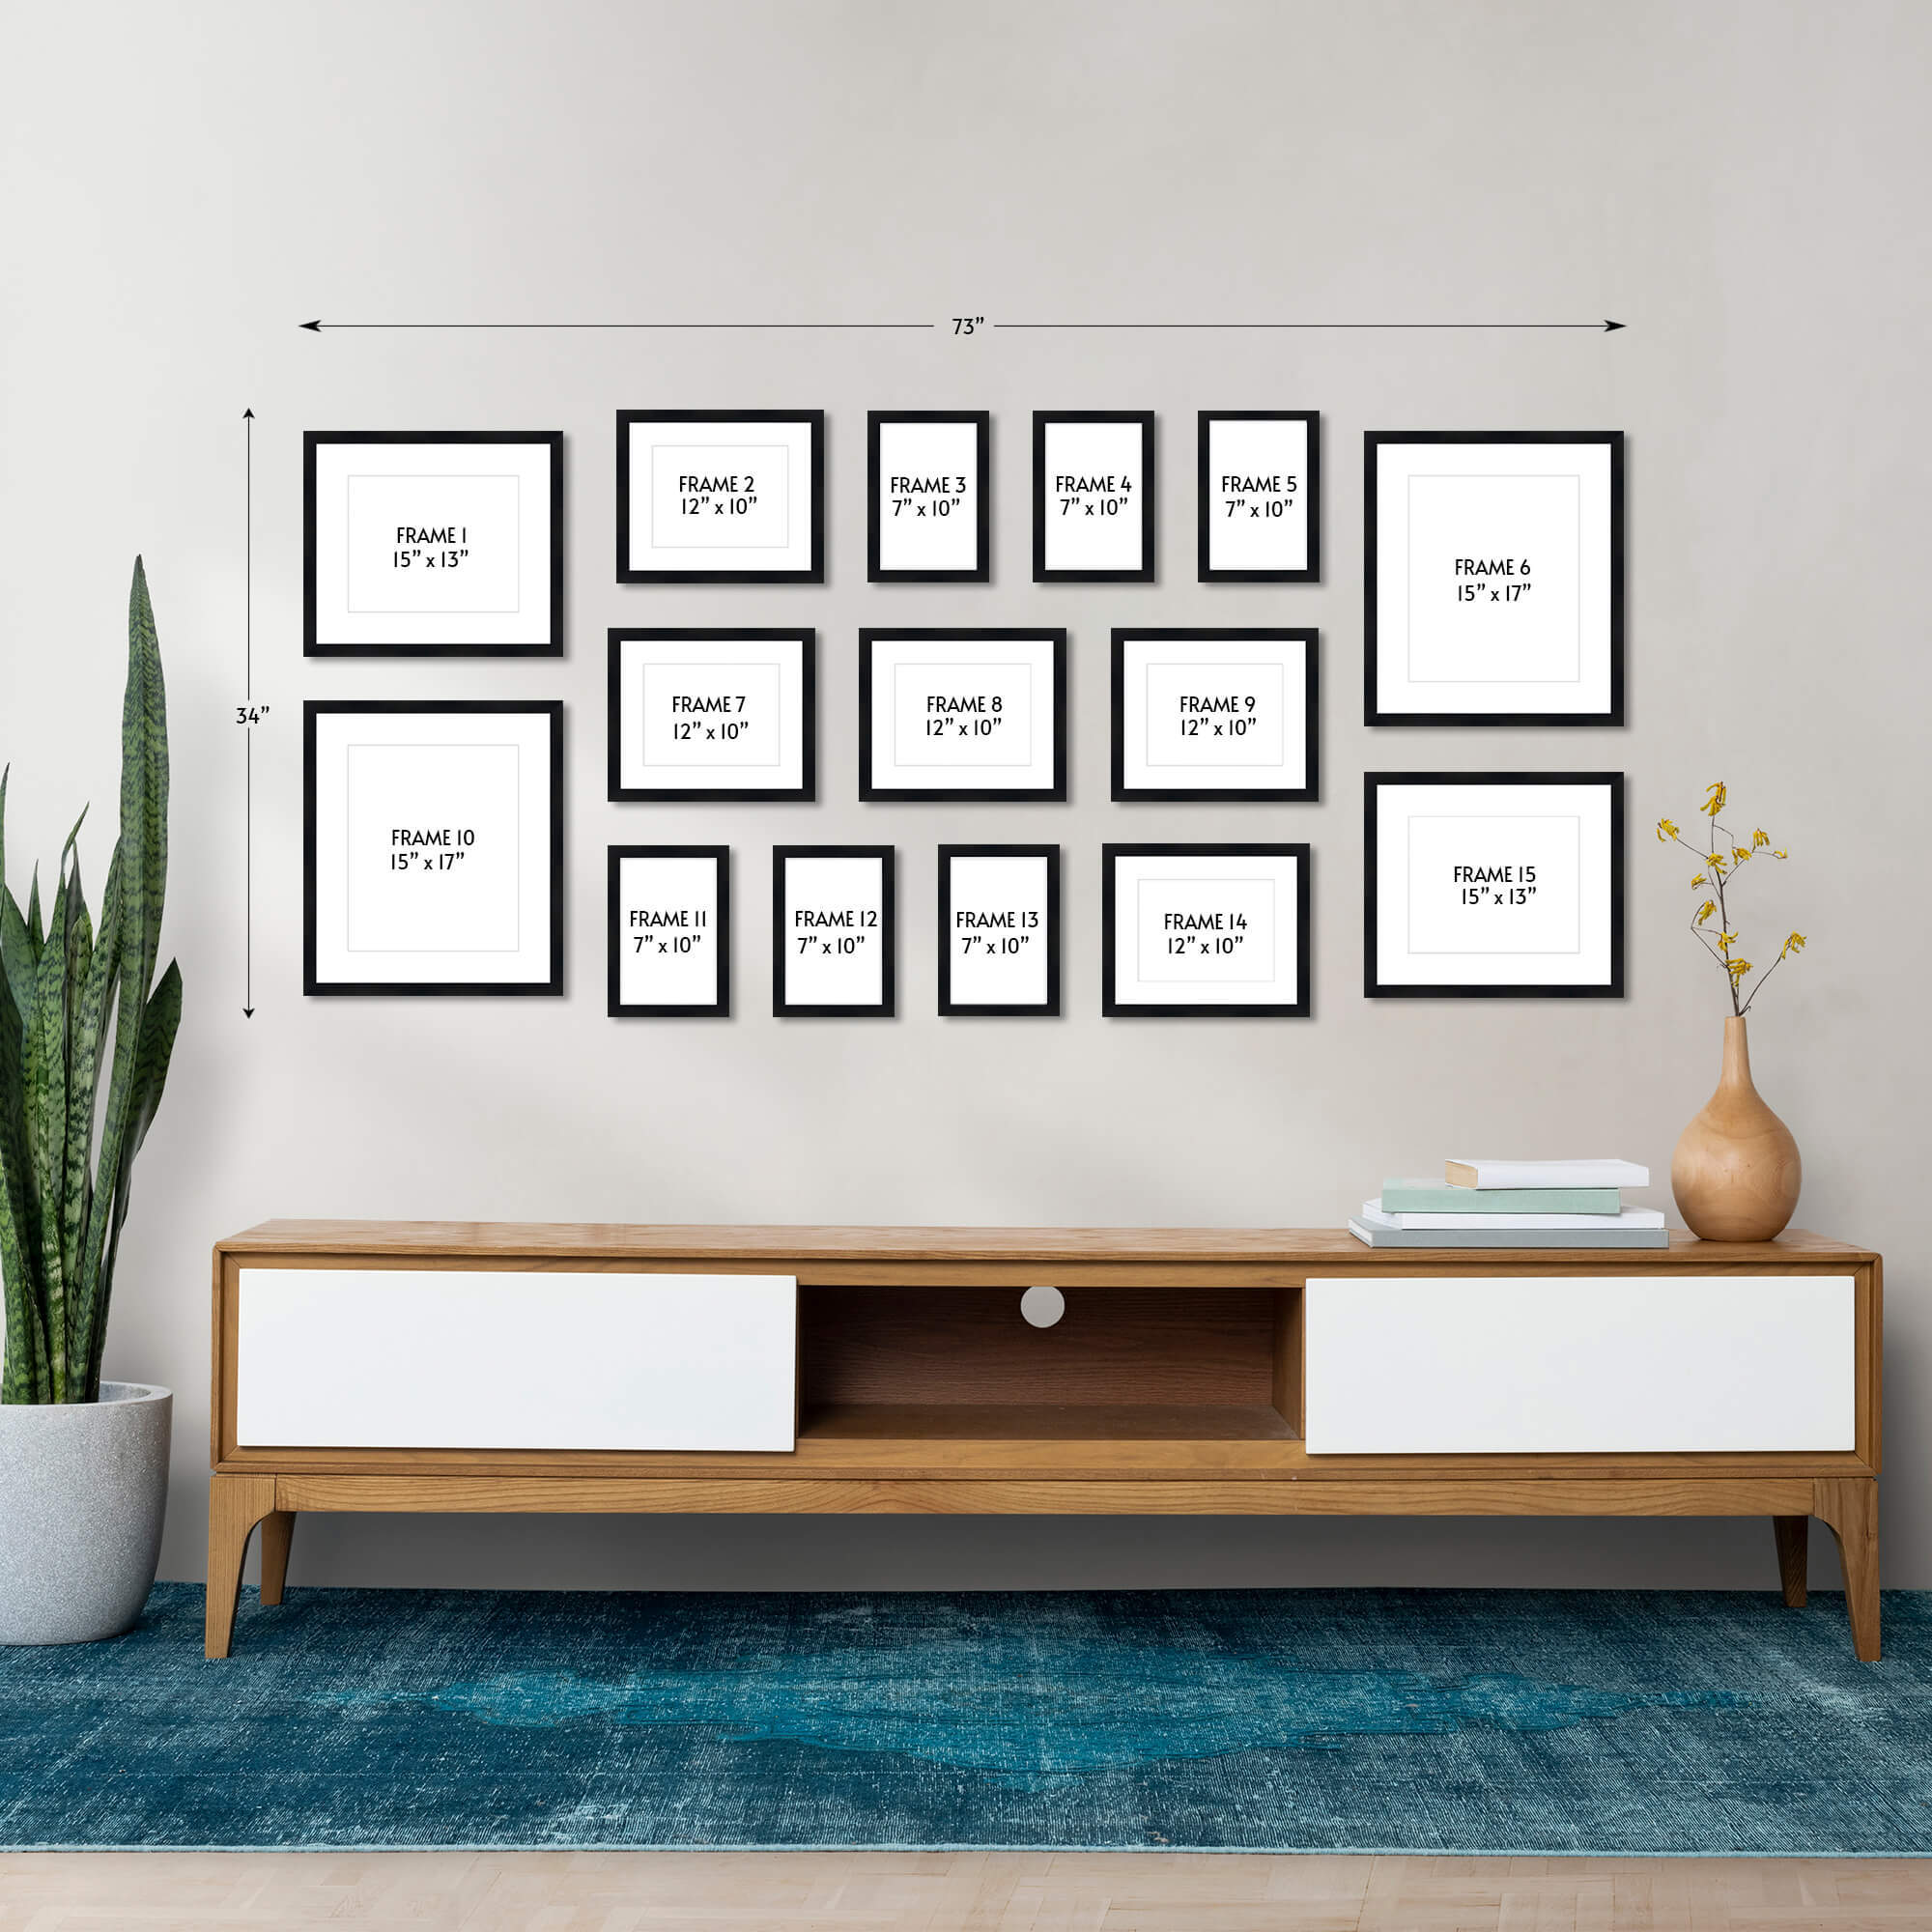 73" x 34" Gallery Wall Wooden Frame (Set of 15)